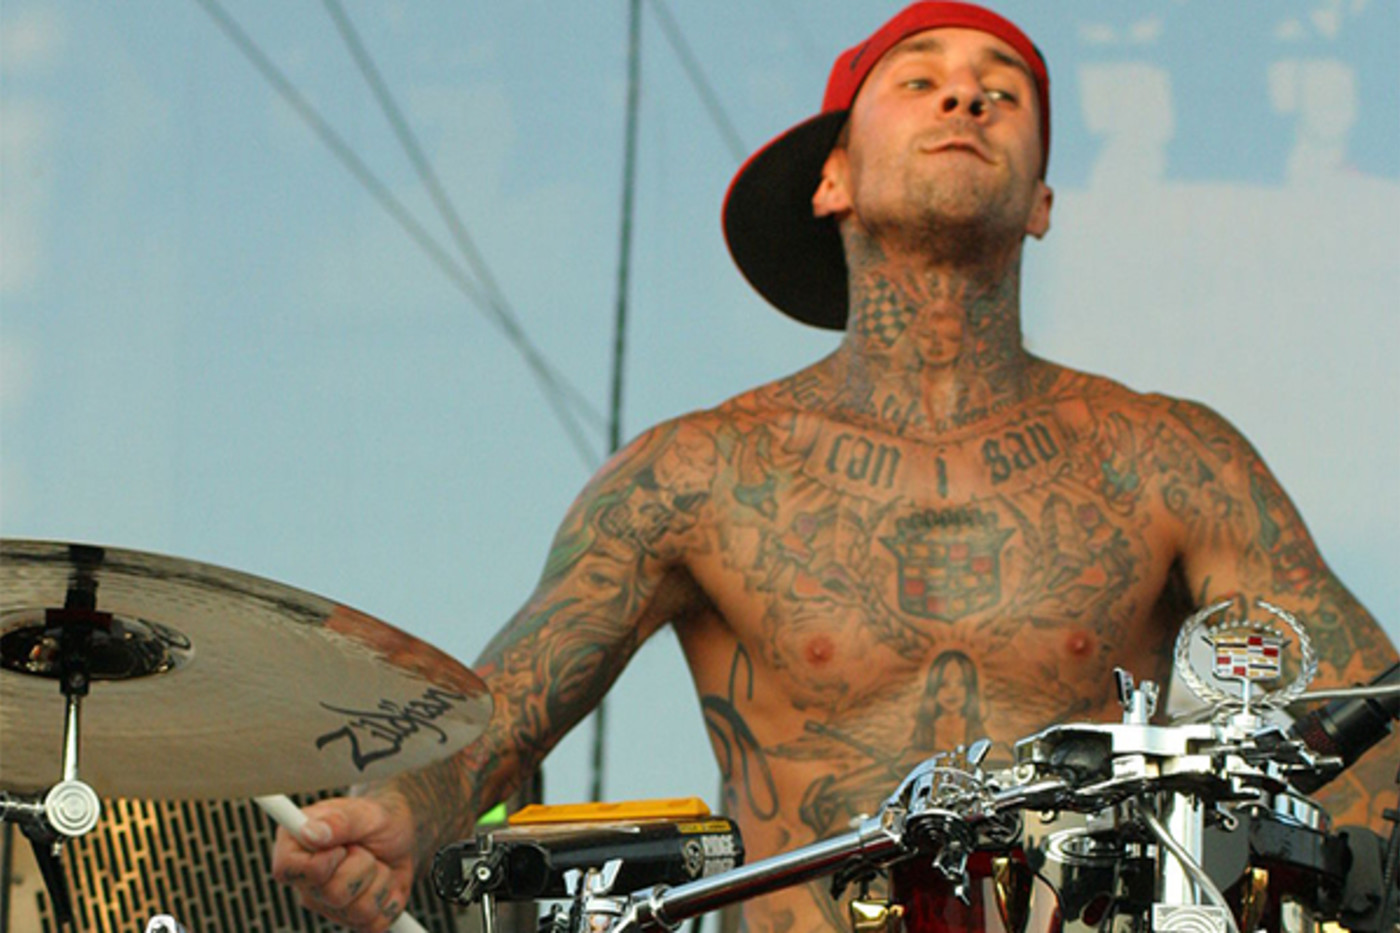 Travis barker on wn network delivers the latest videos and editable pages f...